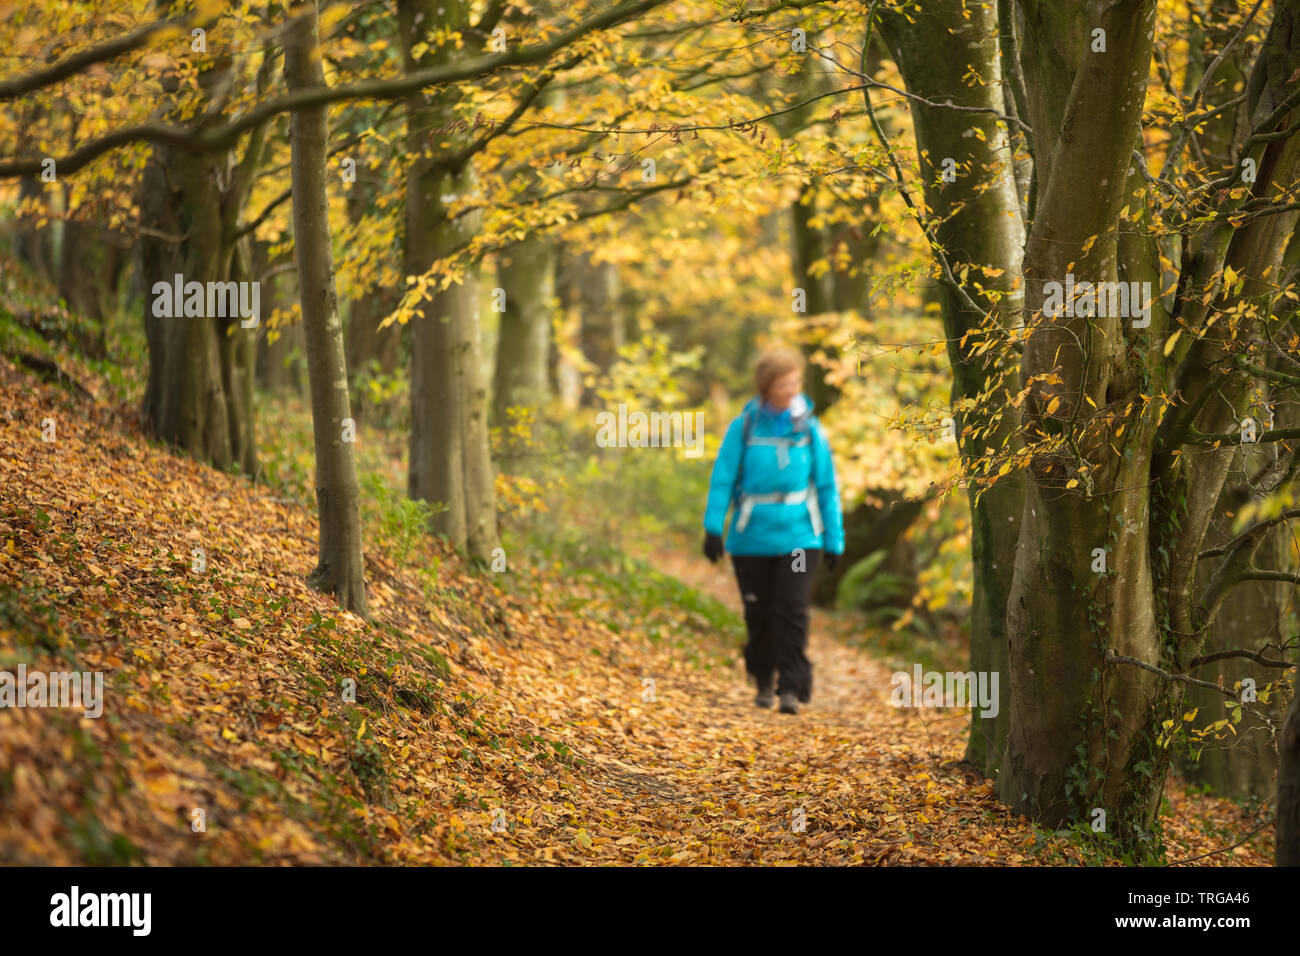 A walker in autumnal Holway Woods near Sandford Orcas, Dorset, England, UK Stock Photo